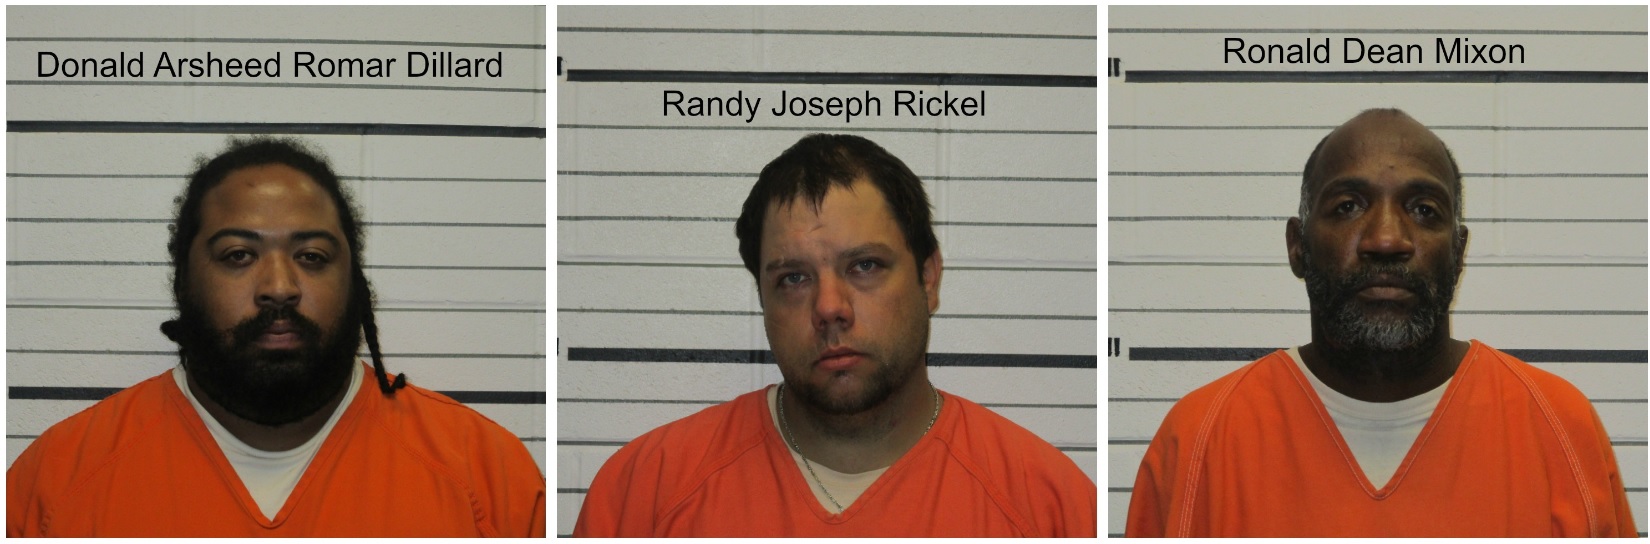 Three Creek County Men Arrested for Knowingly Concealing Stolen Property